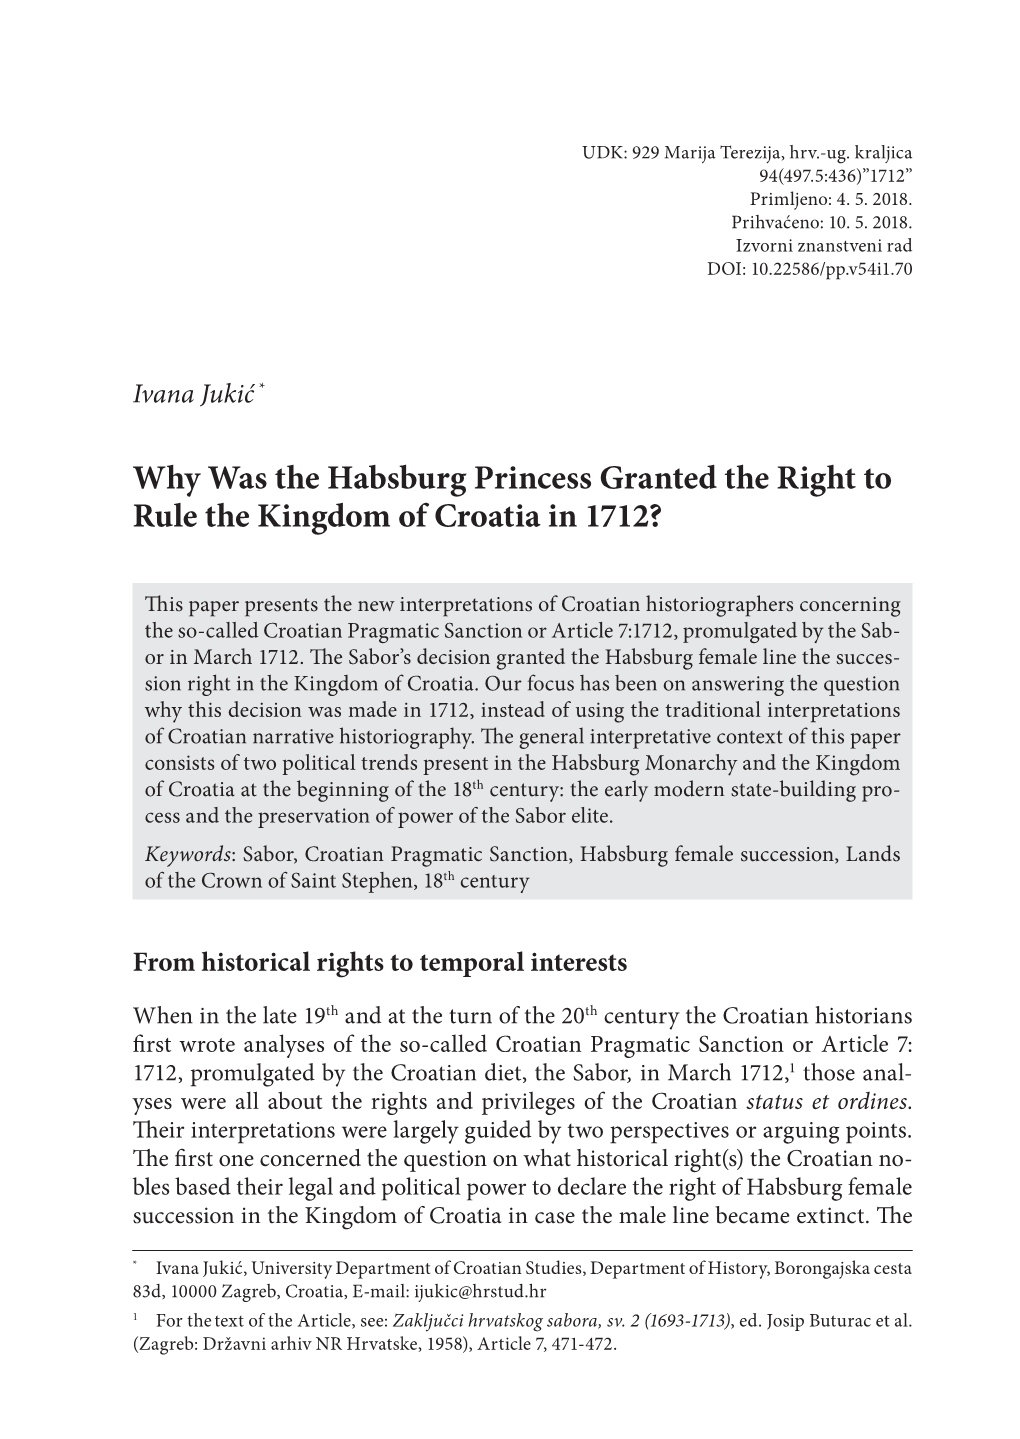 Why Was the Habsburg Princess Granted the Right to Rule the Kingdom of Croatia in 1712?